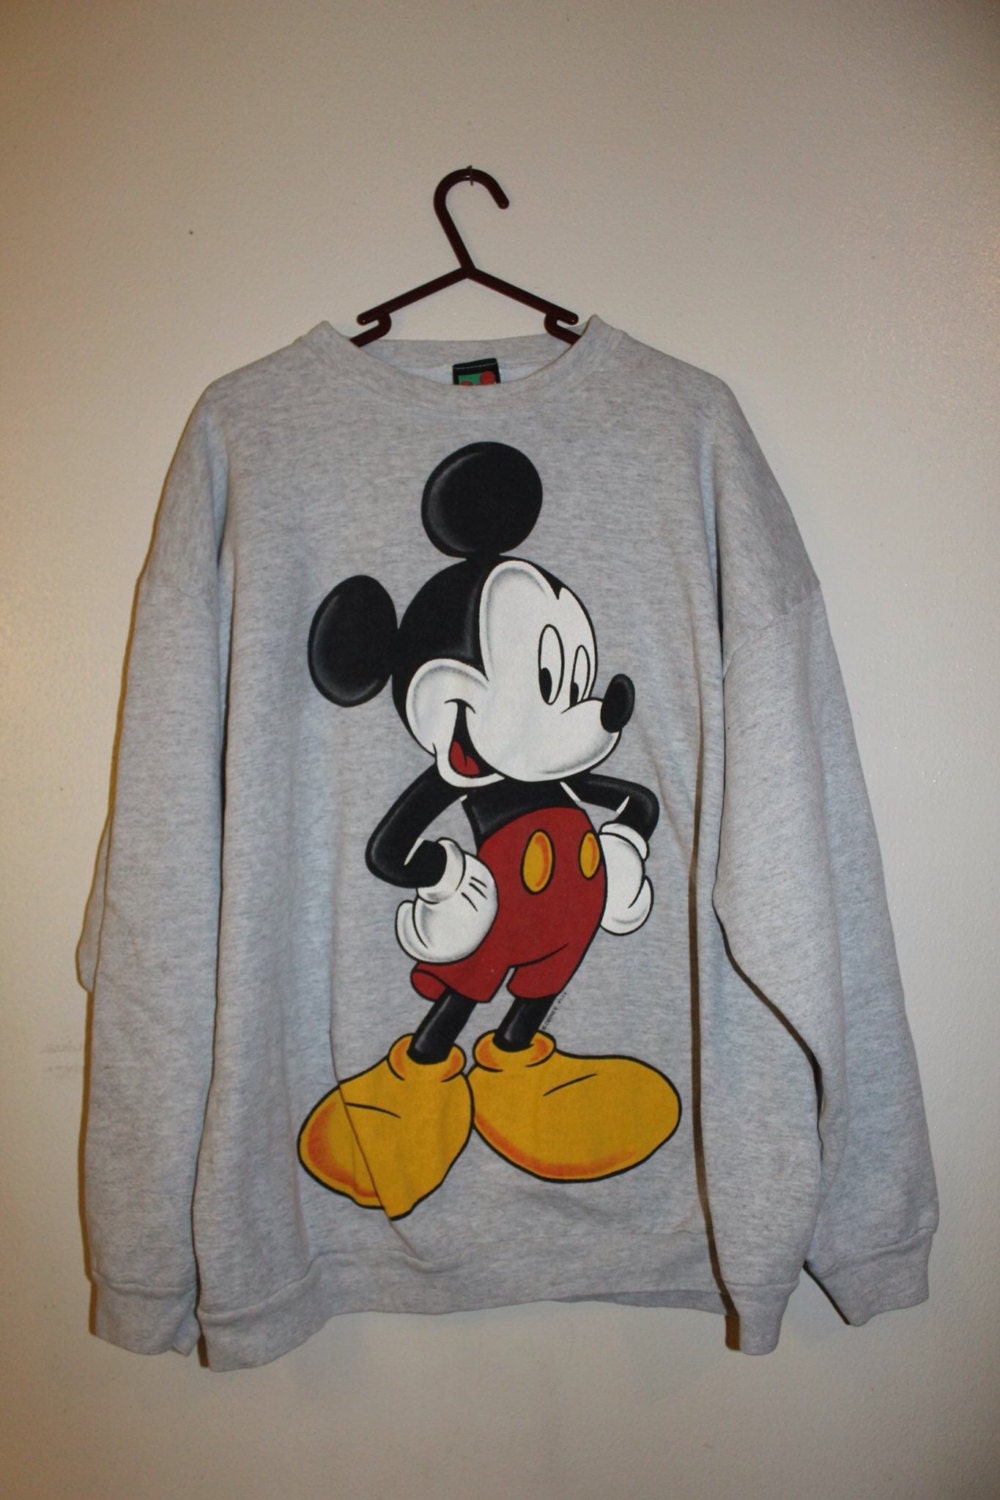 Vintage 90's Mickey Mouse Sweater One Size Fits All by